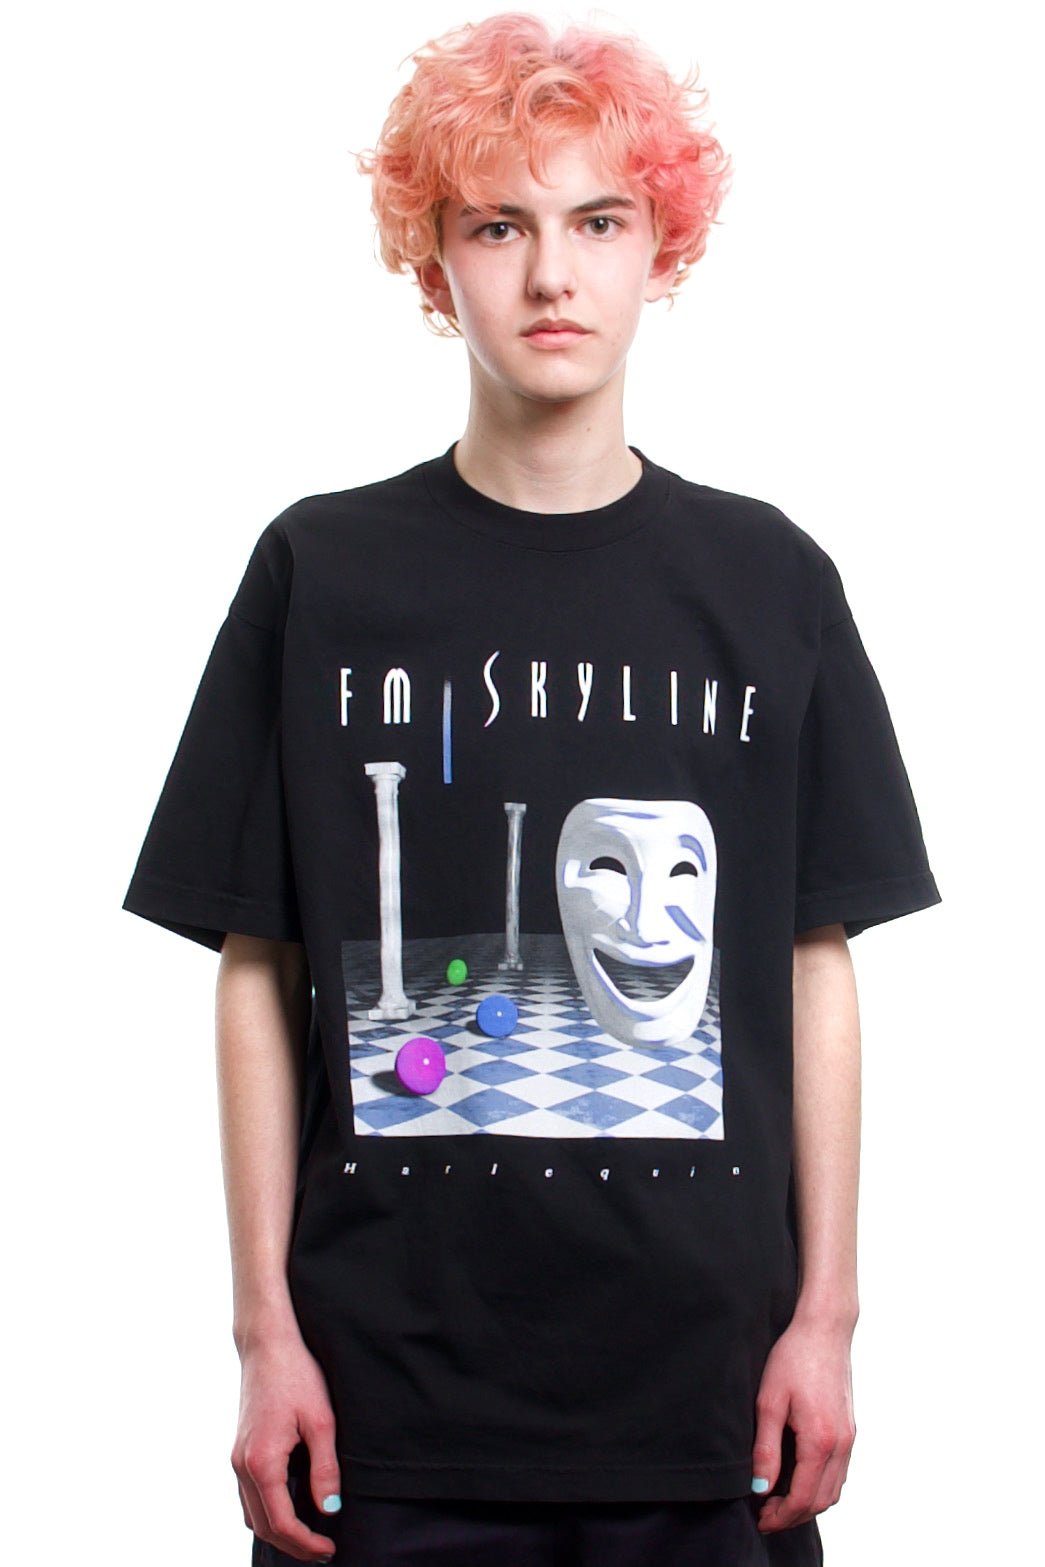 FM Skyline - Harlequin T-Shirt - 100% Electronica Official Store (Photo 1)